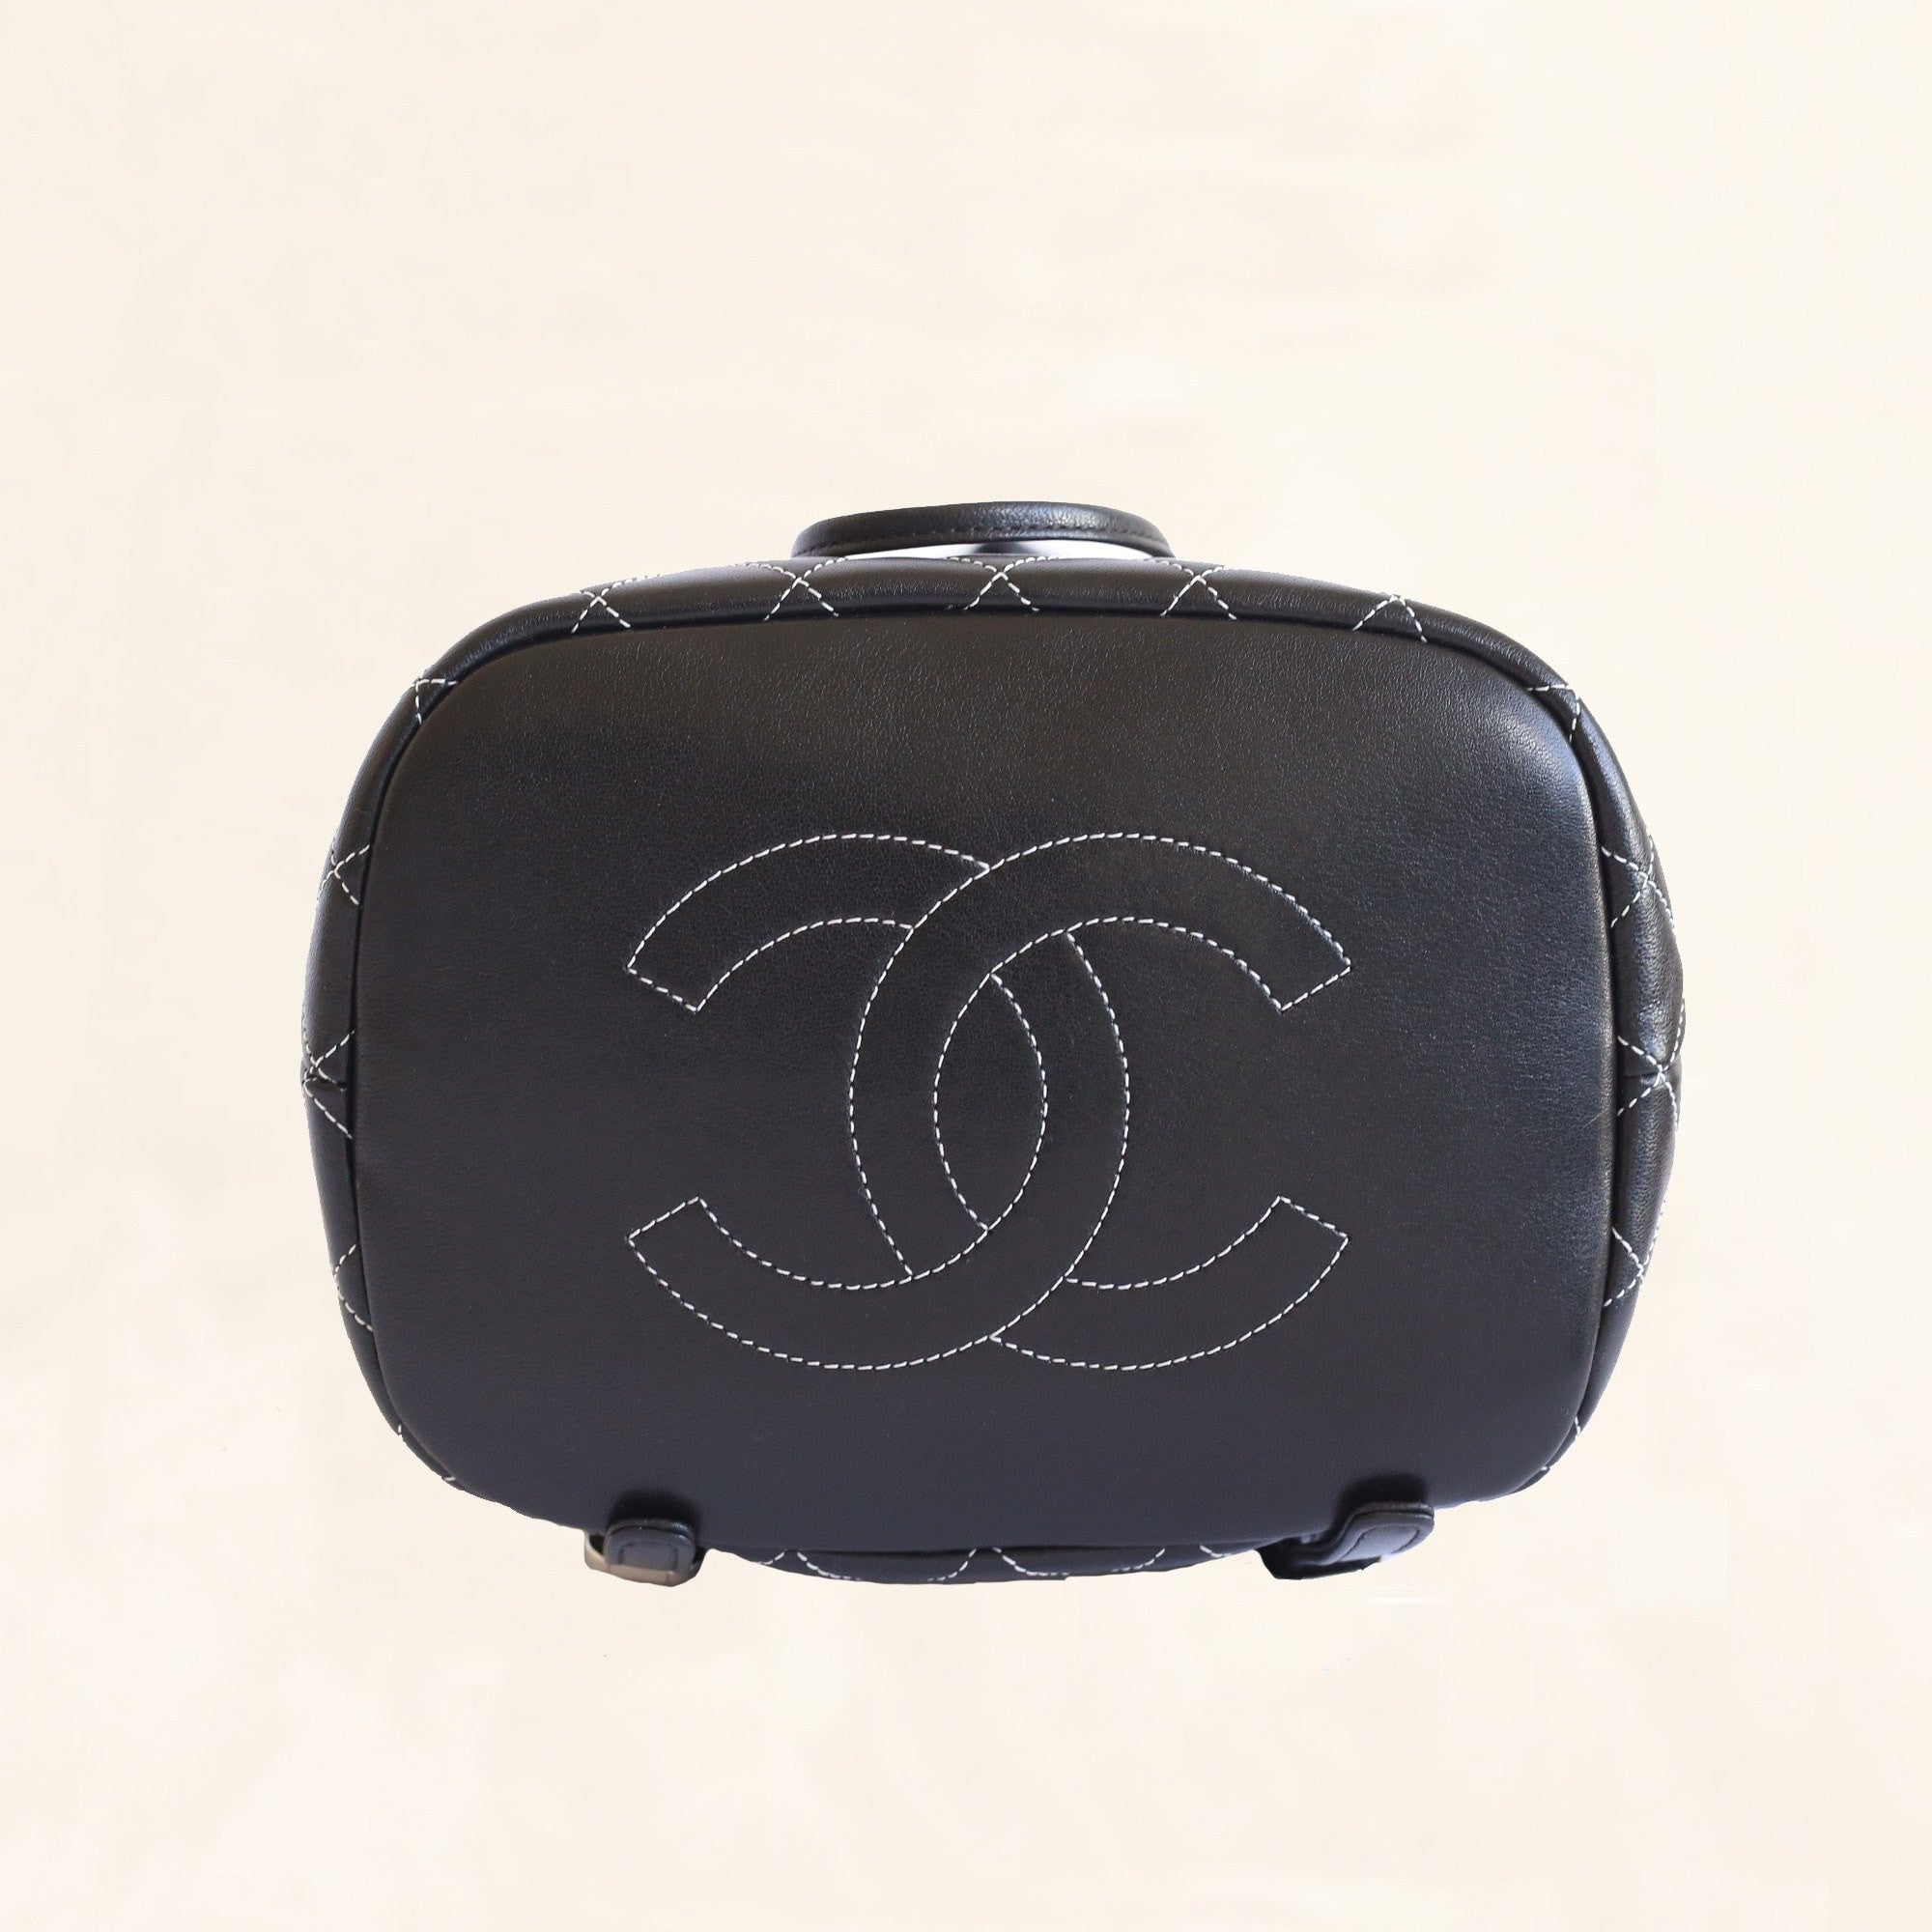 CHANEL CHANEL Shiny Caviar Quilted Strass CC Cosmetic Case Black |  FASHIONPHILE